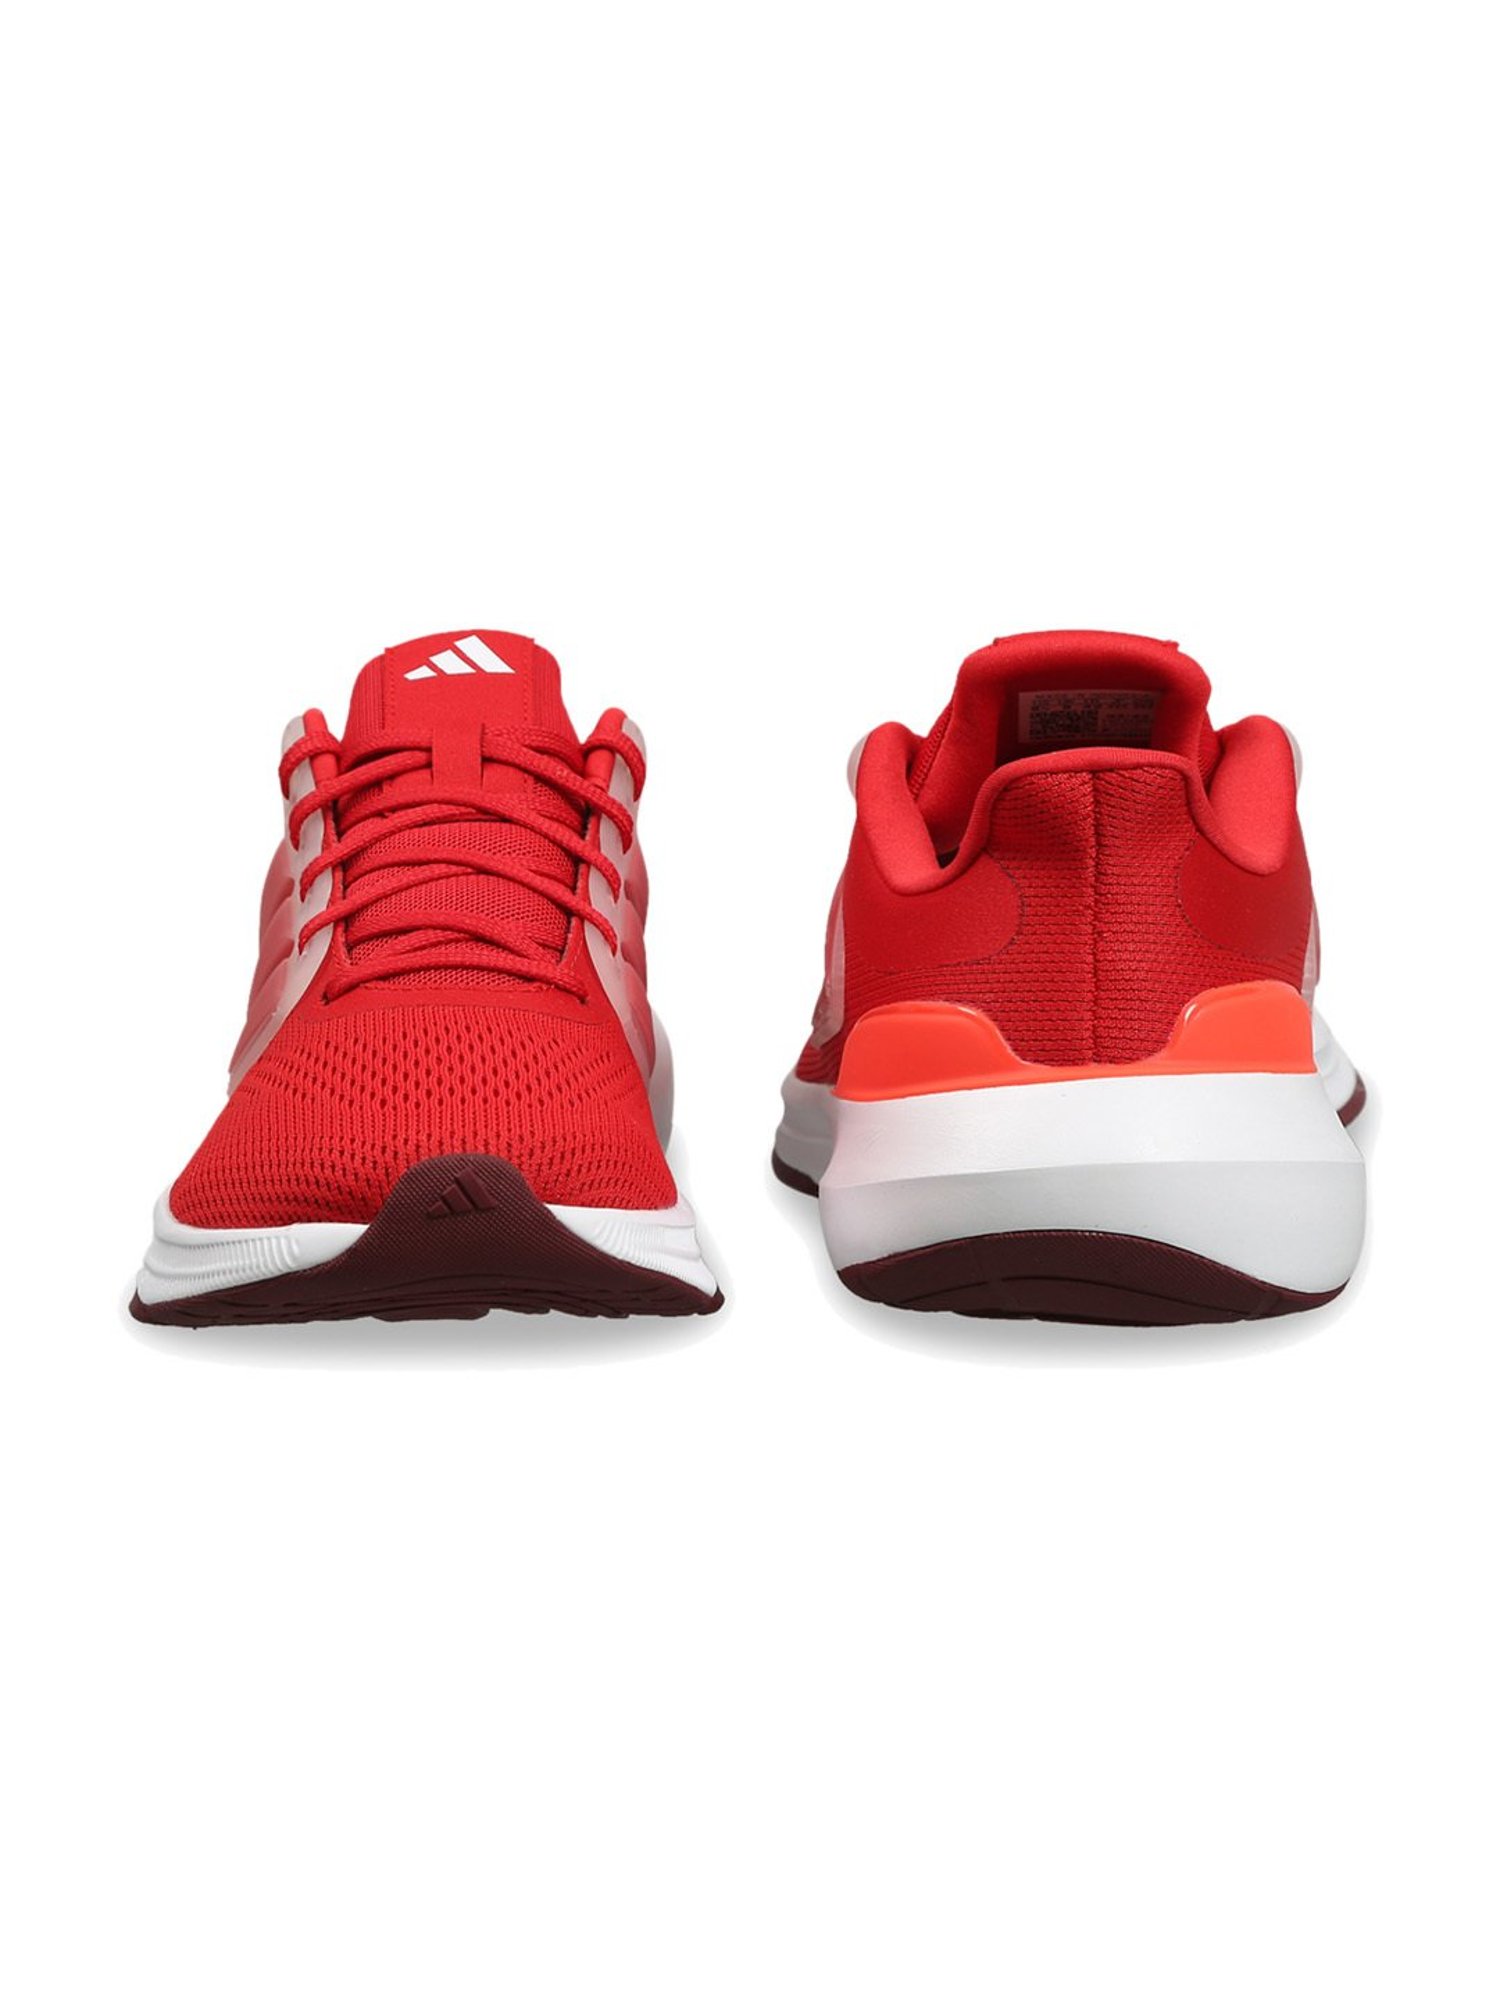 Red - sneakers | adidas India